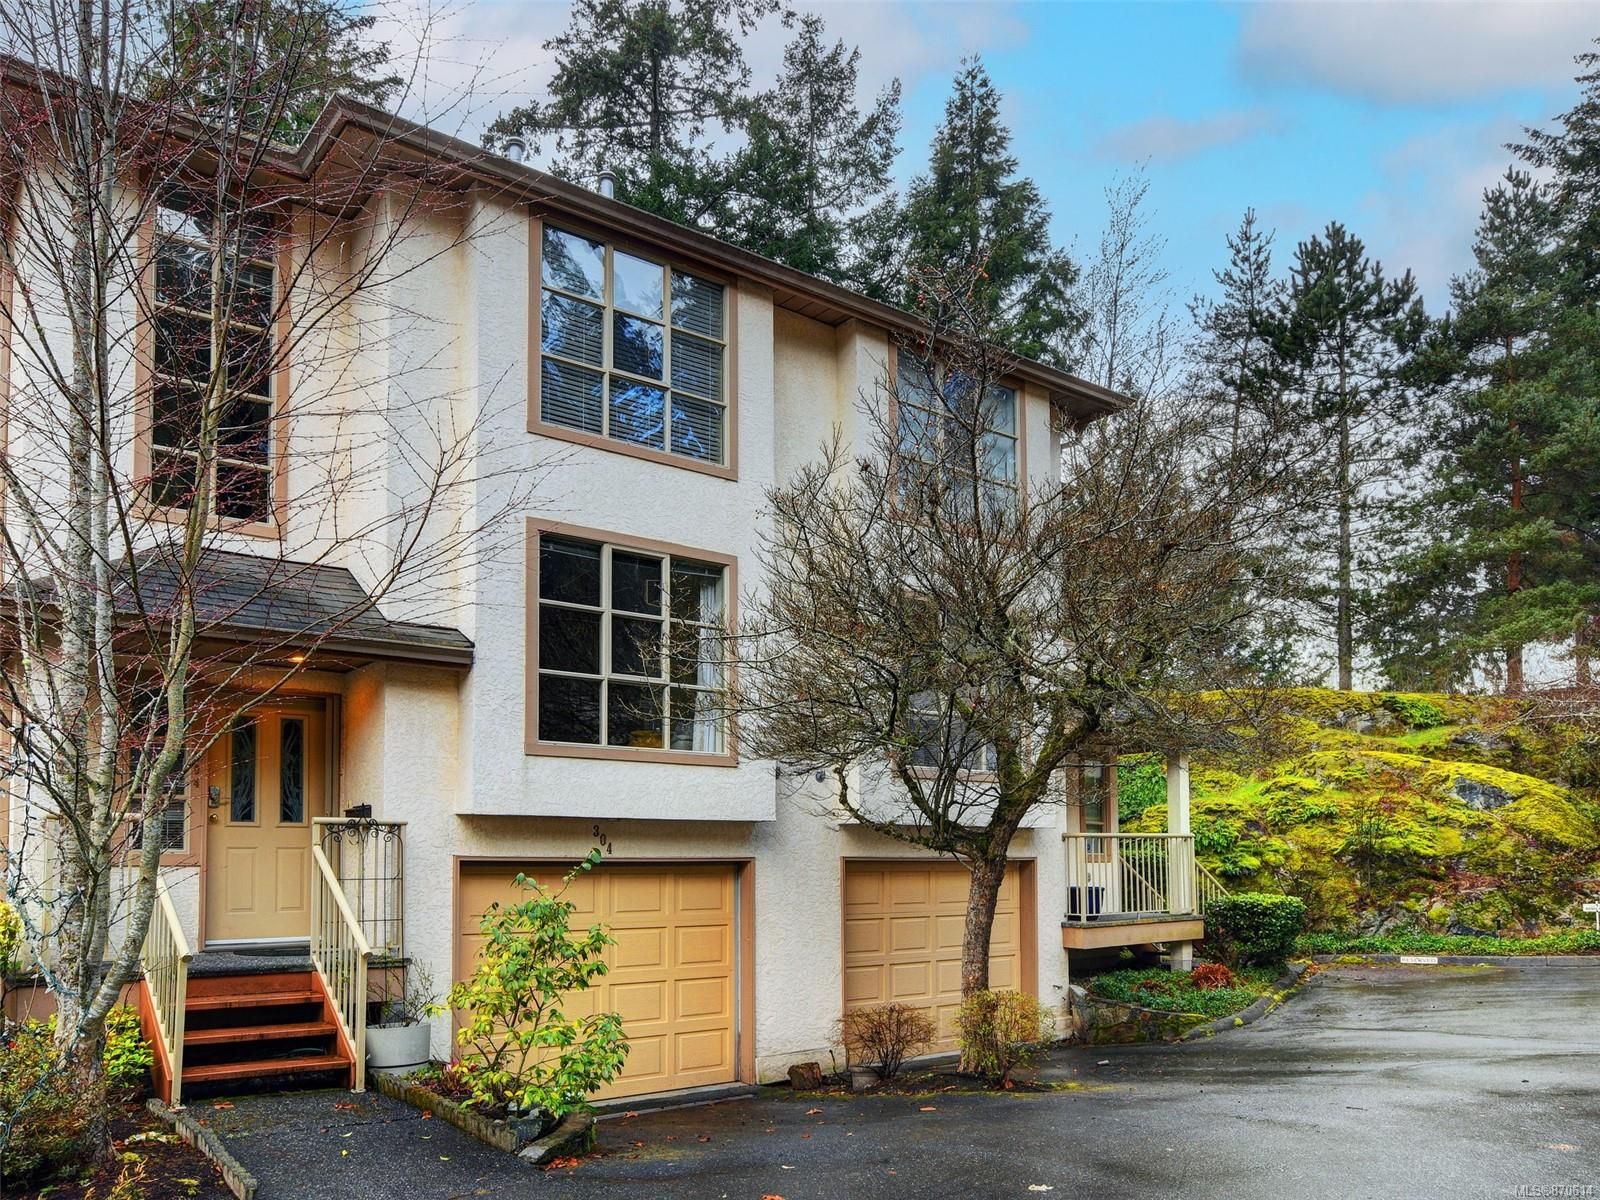 I have sold a property at 304 510 Marsett Pl in Saanich
